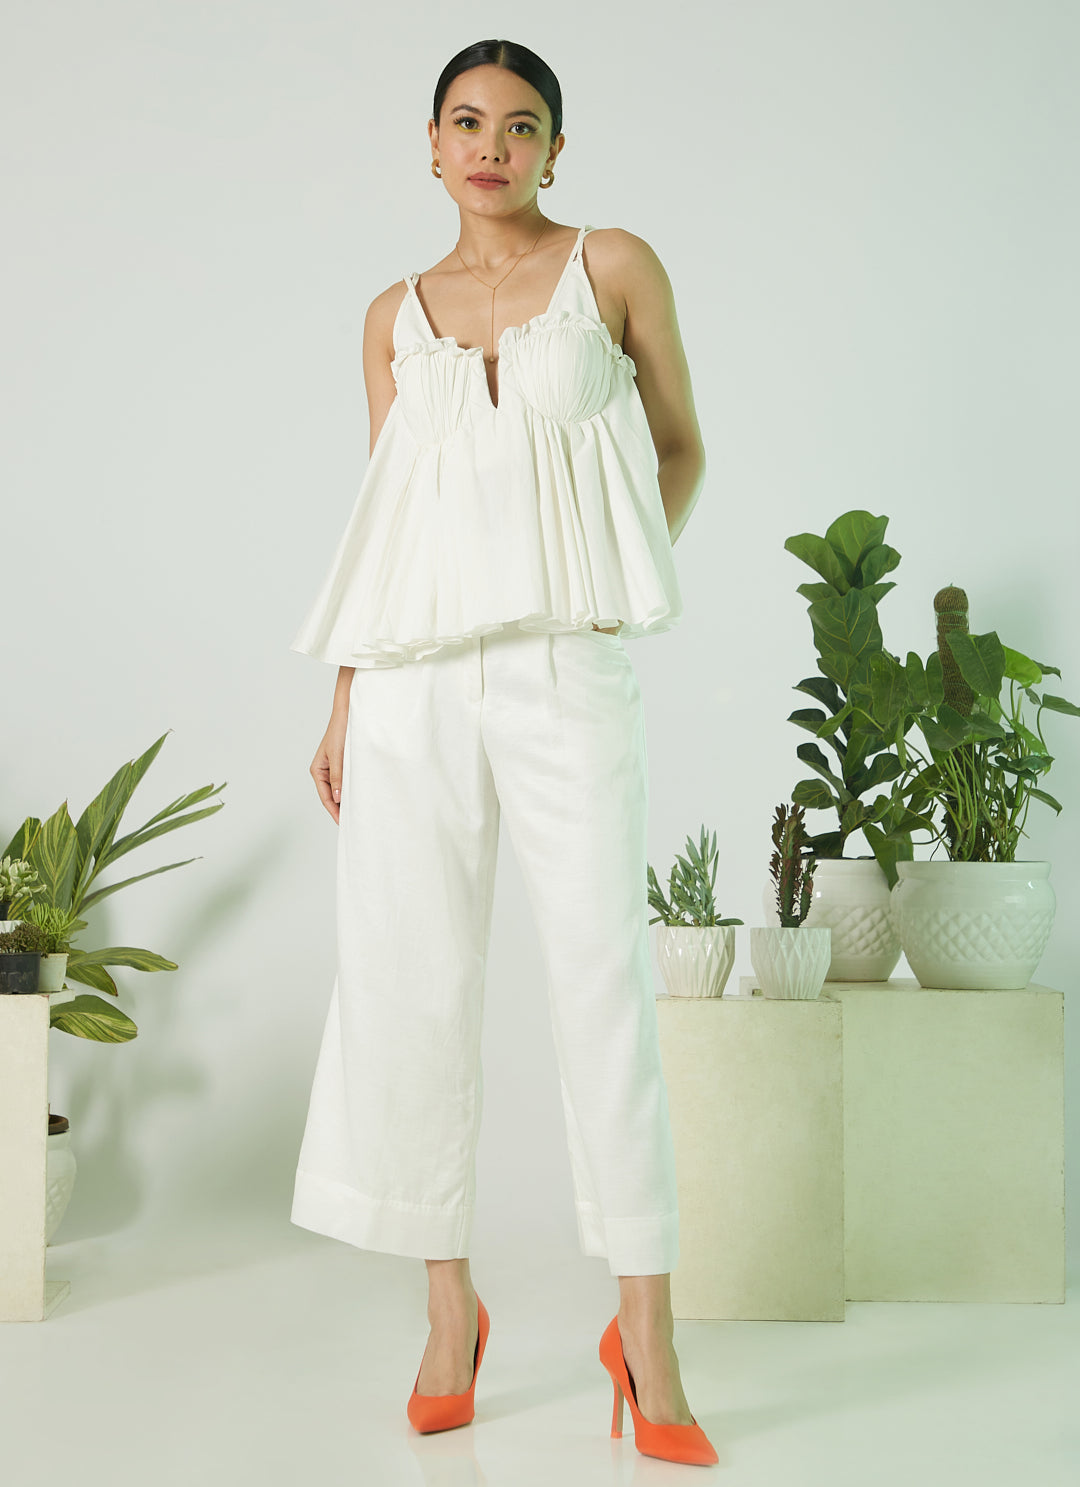 THE CHALKY WHITE BRALETTE CO-ORD